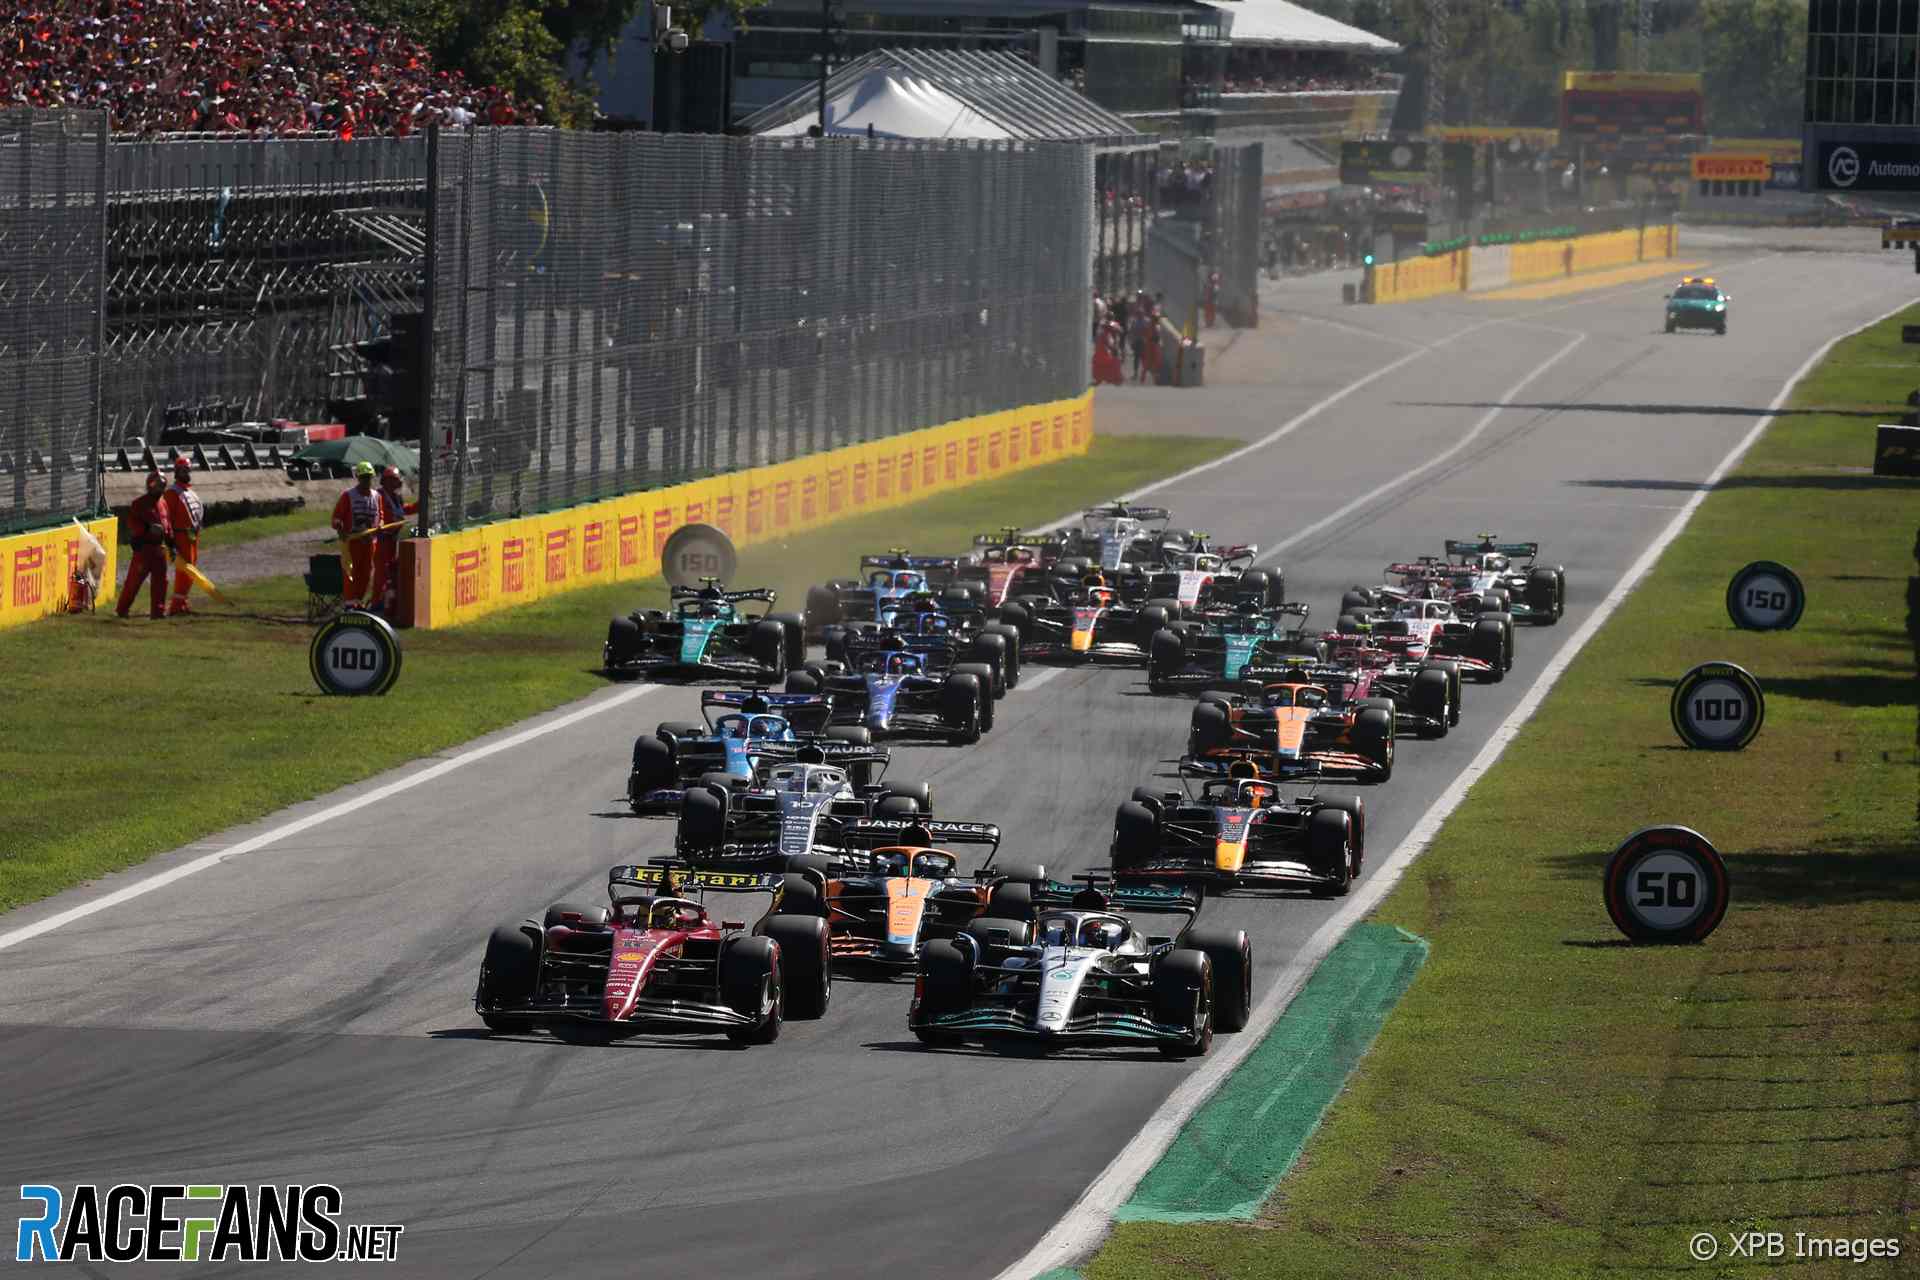 The 2022 Italian Grand Prix was held at Monza and won by Max Verstappen